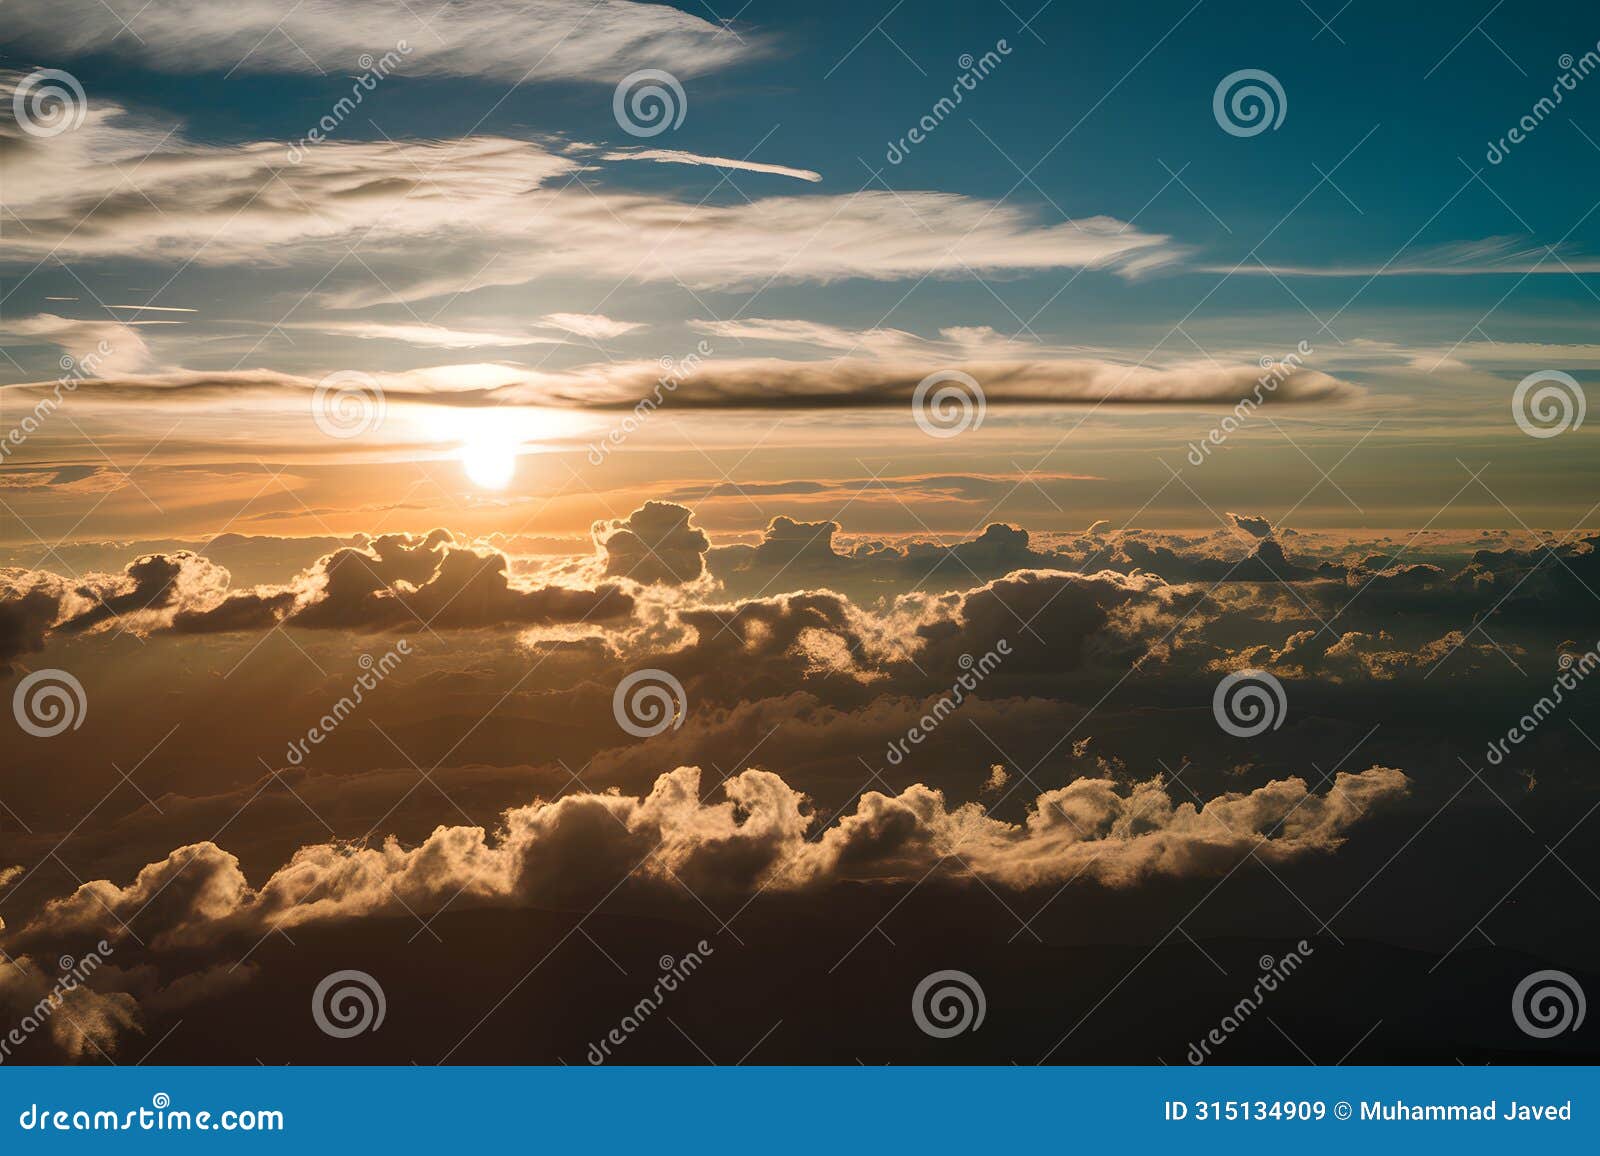 above the clouds sun illuminates the beauty of the sky